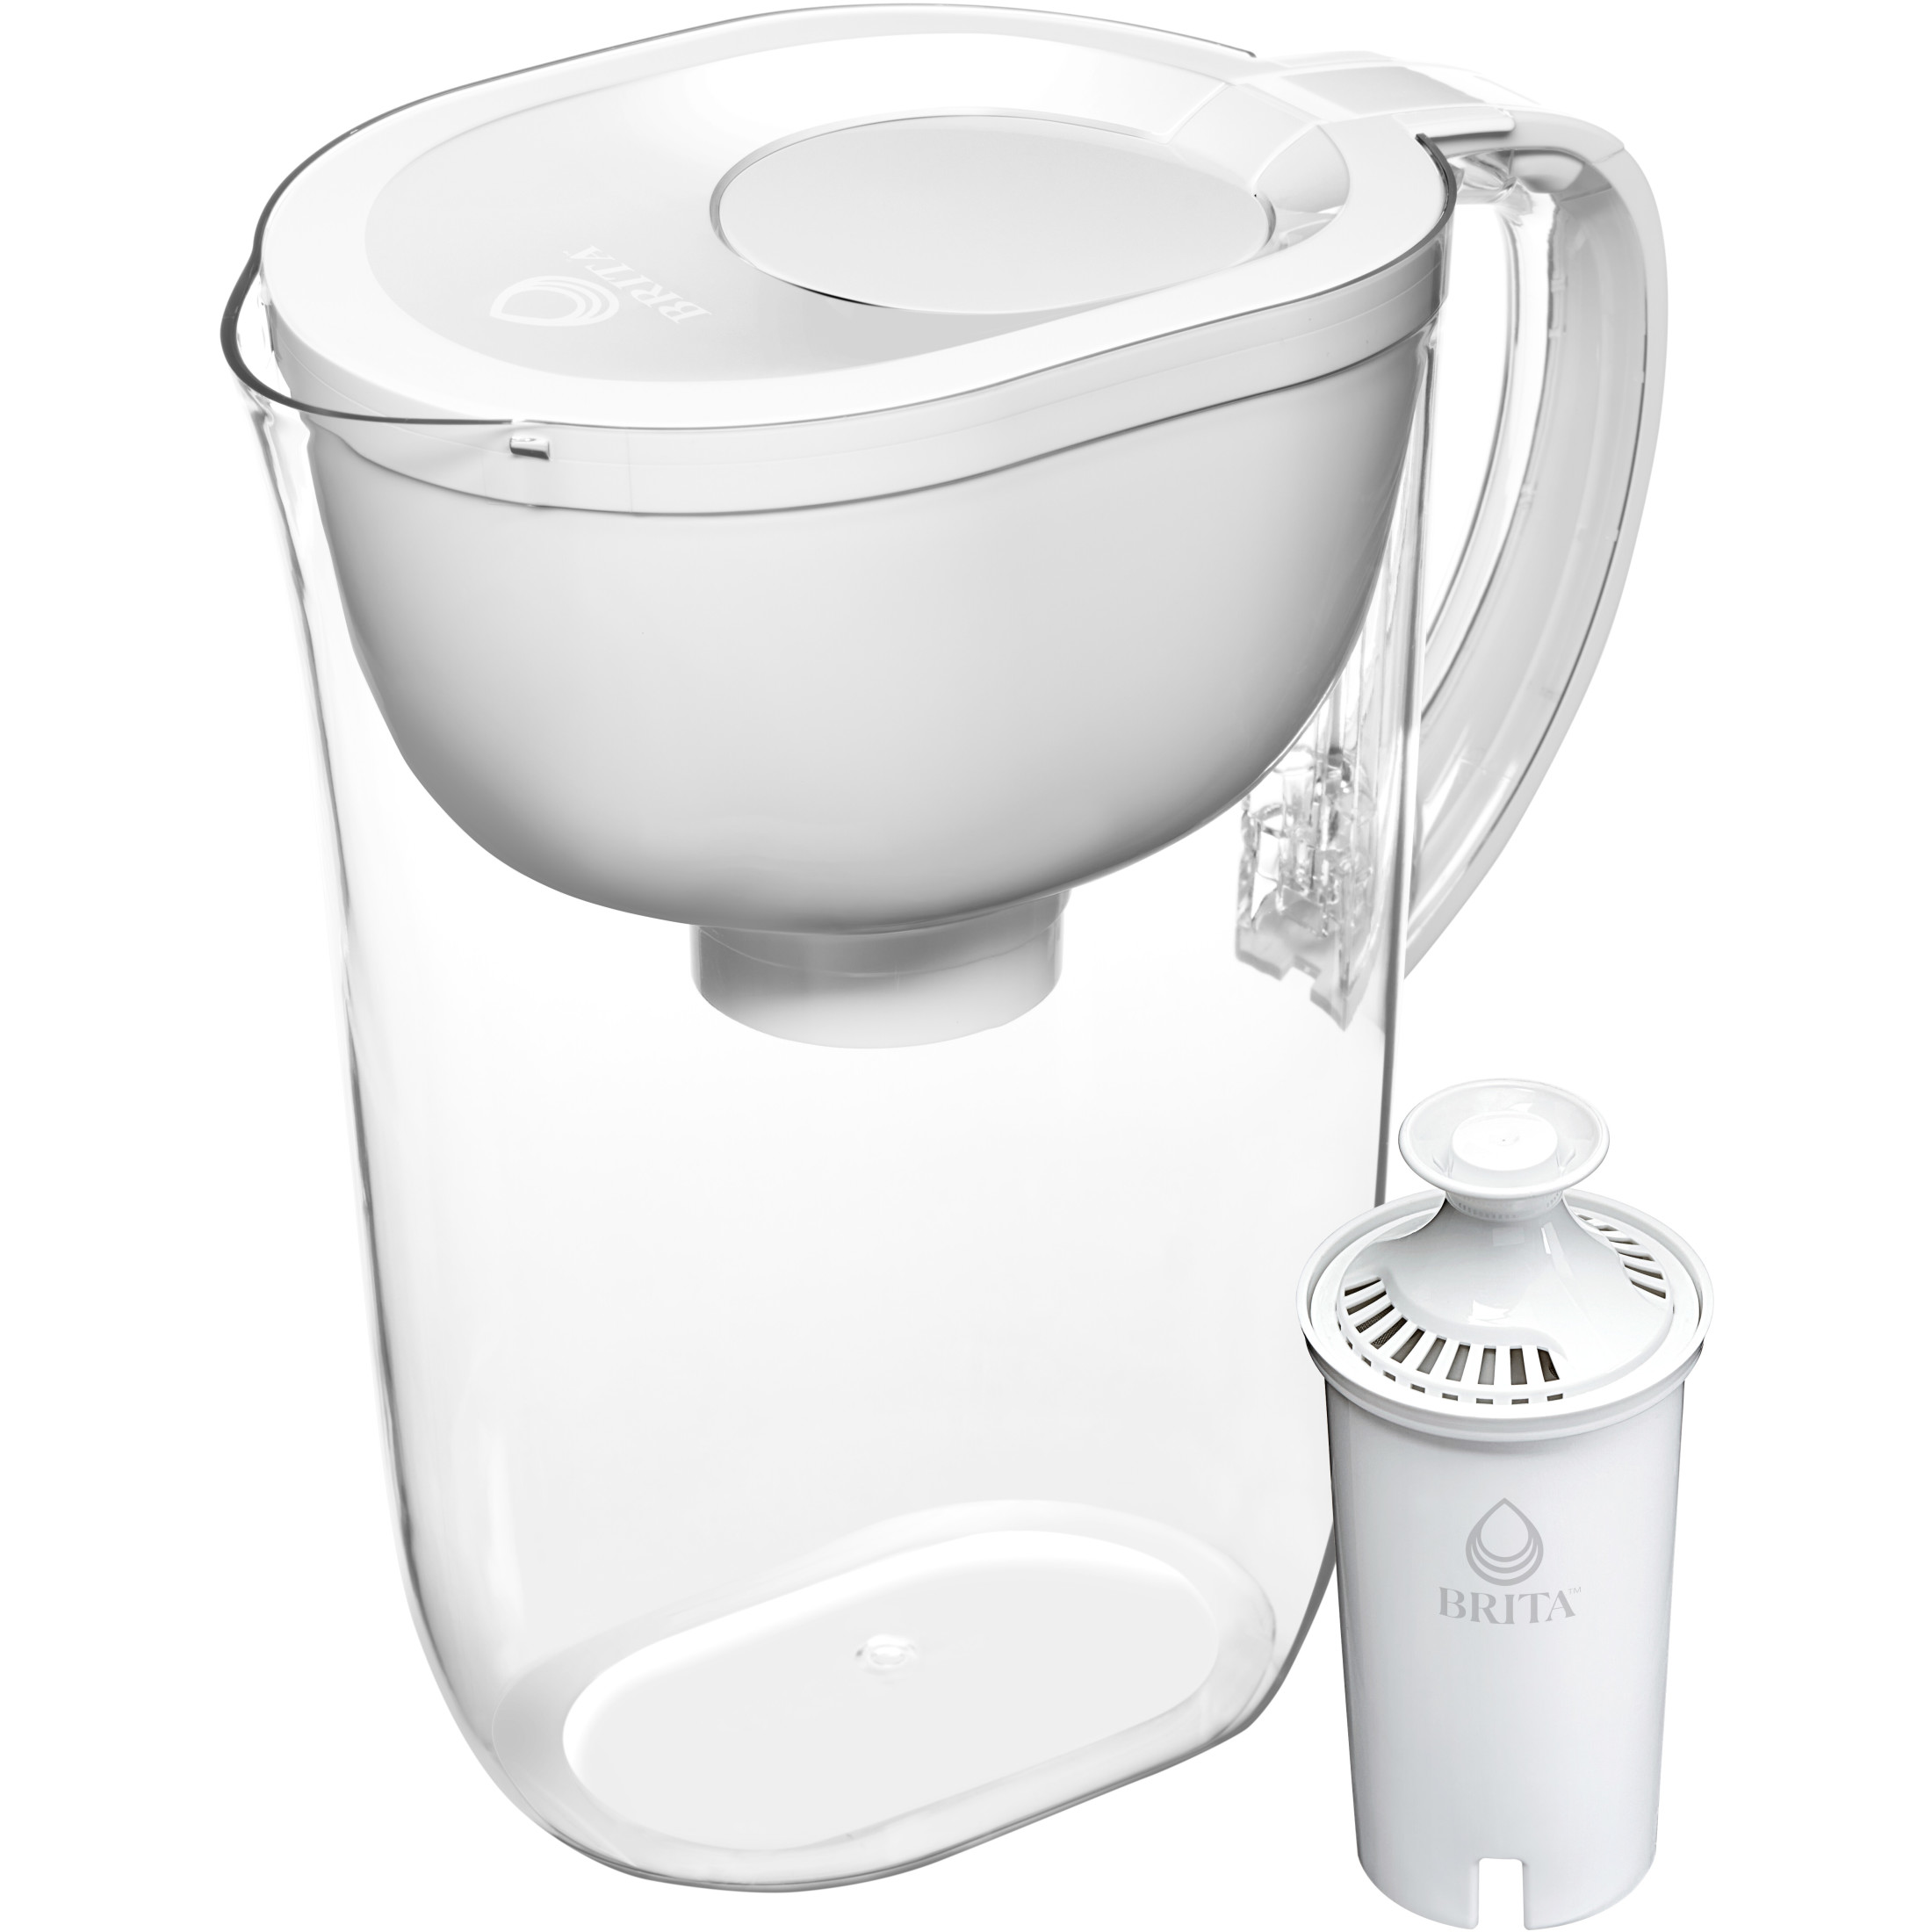 Brita Large 10 Cup Water Filter Pitcher with 1 Standard Filter, BPA Free, Everyday, White - image 1 of 10